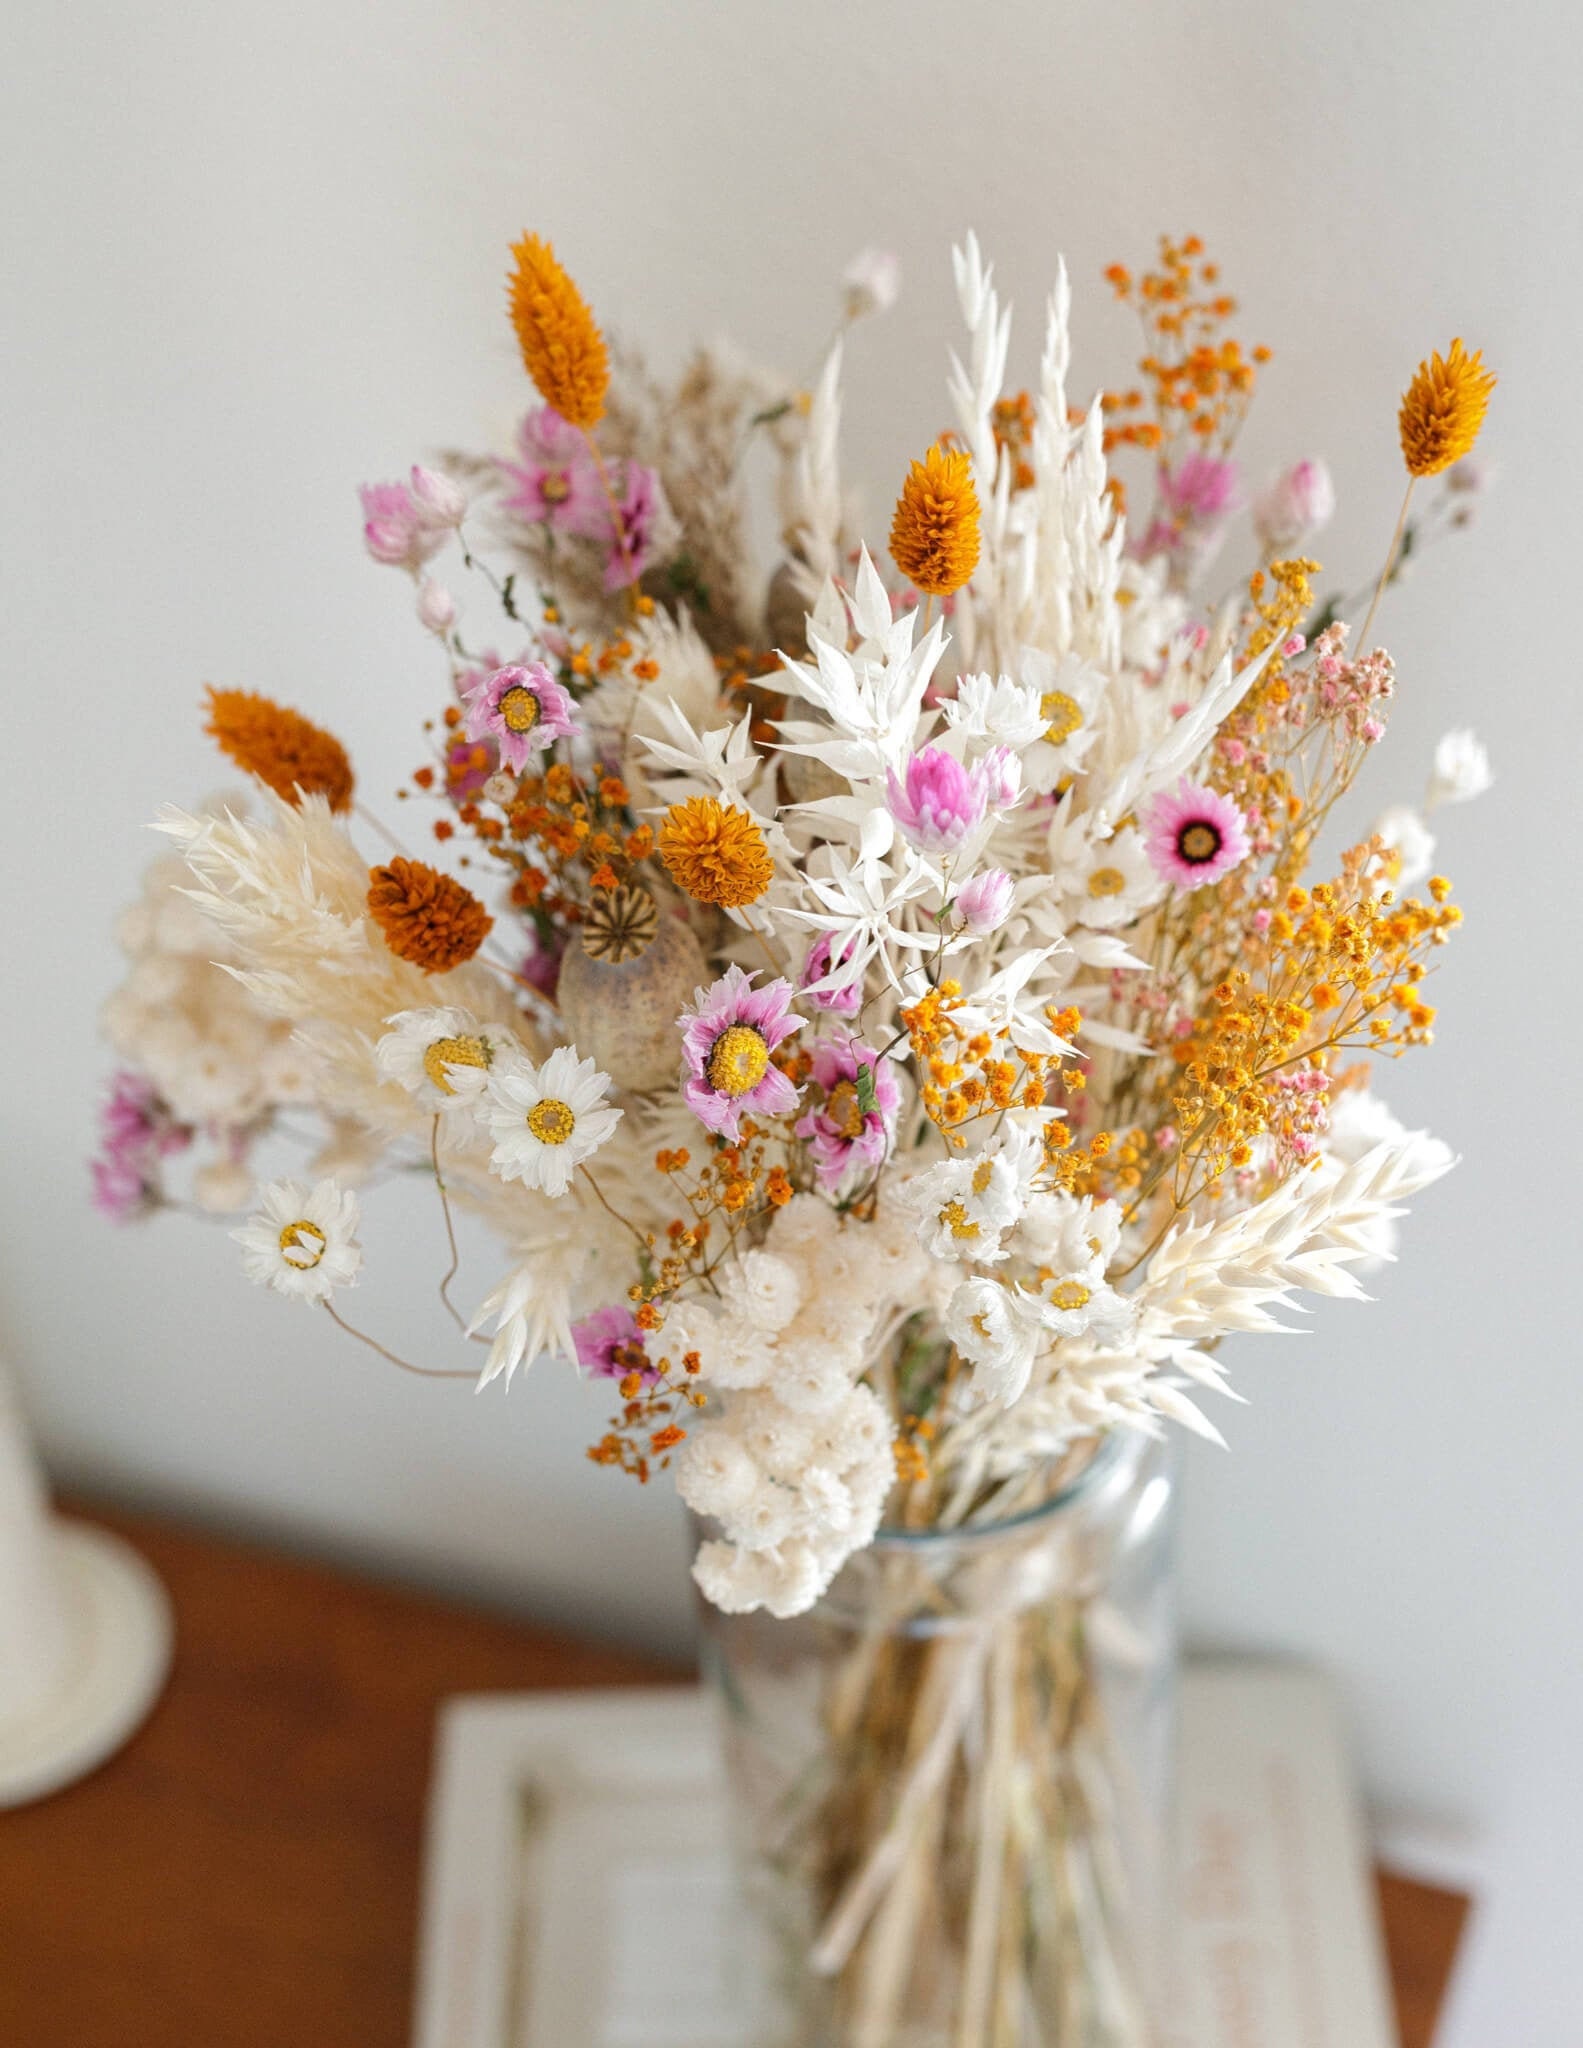 Three vases filled with natural-coloured dried flowers - MyFlowers